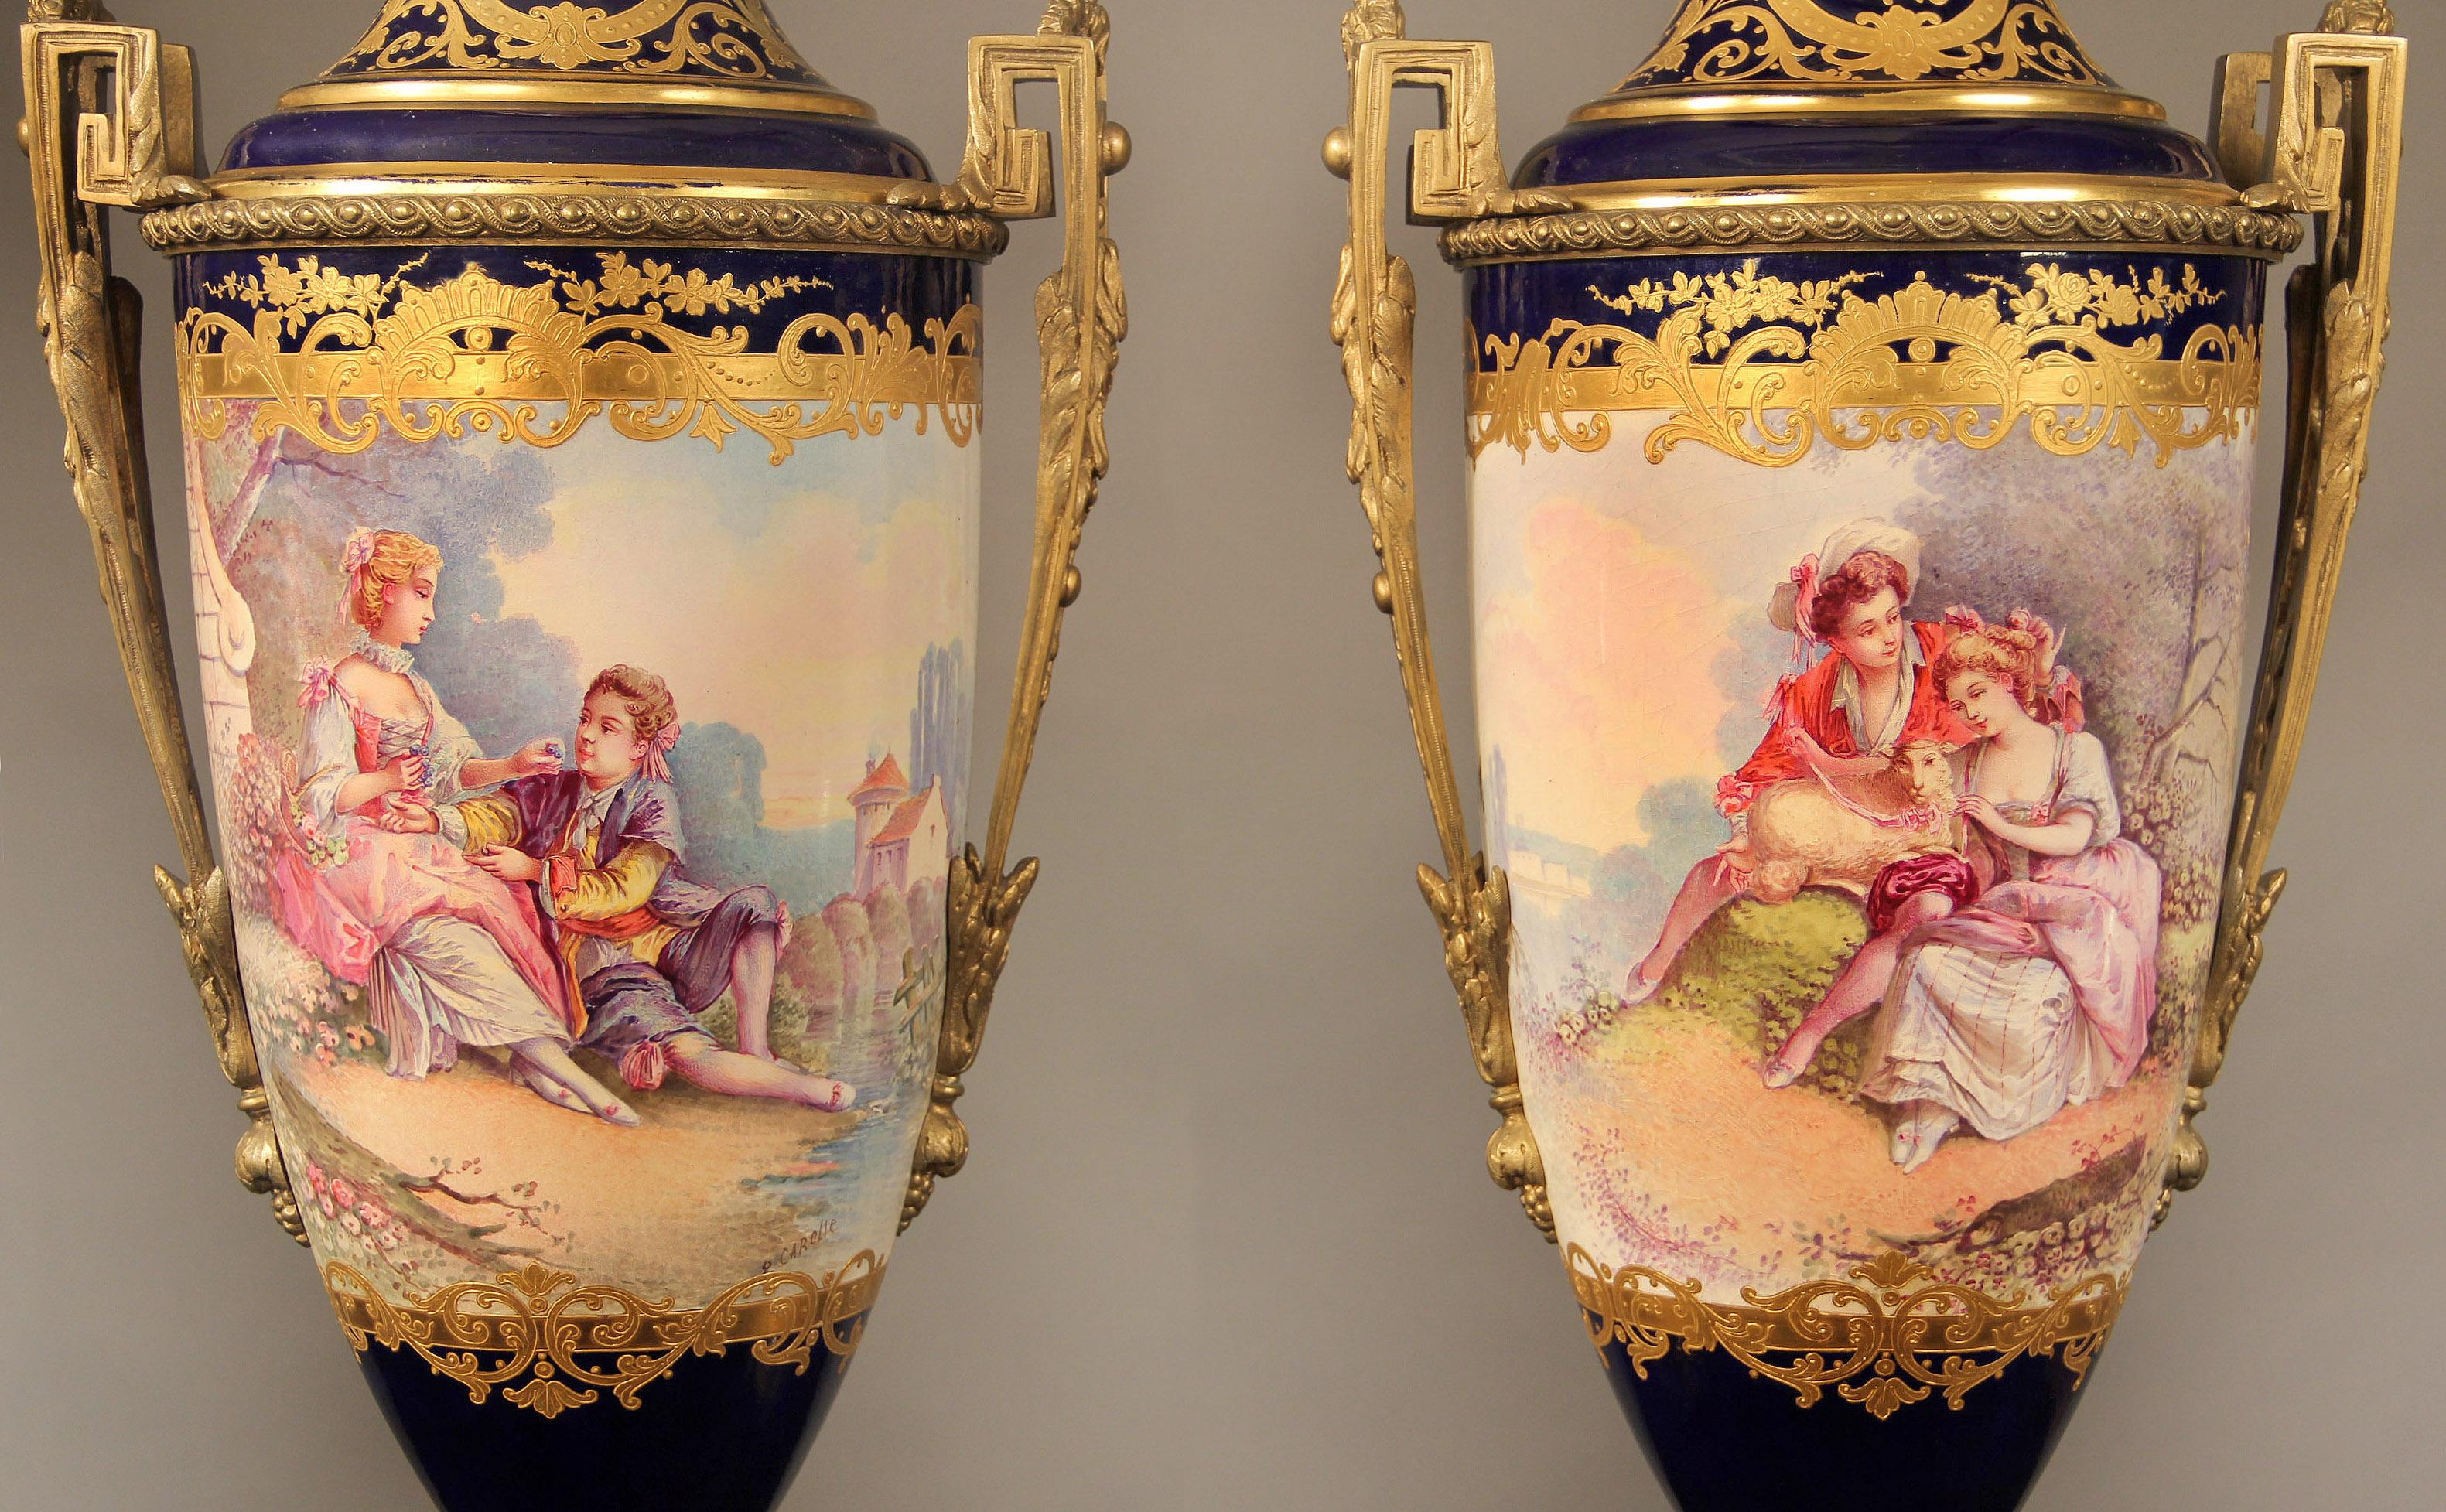 A nice pair of late 19th century gilt bronze mounted cobalt blue Sèvres style porcelain vases

The vases are decorated with finely tooled gilt reserves on a deep blue ground; the wraparound painted scenes with courting couples inspired by the fete